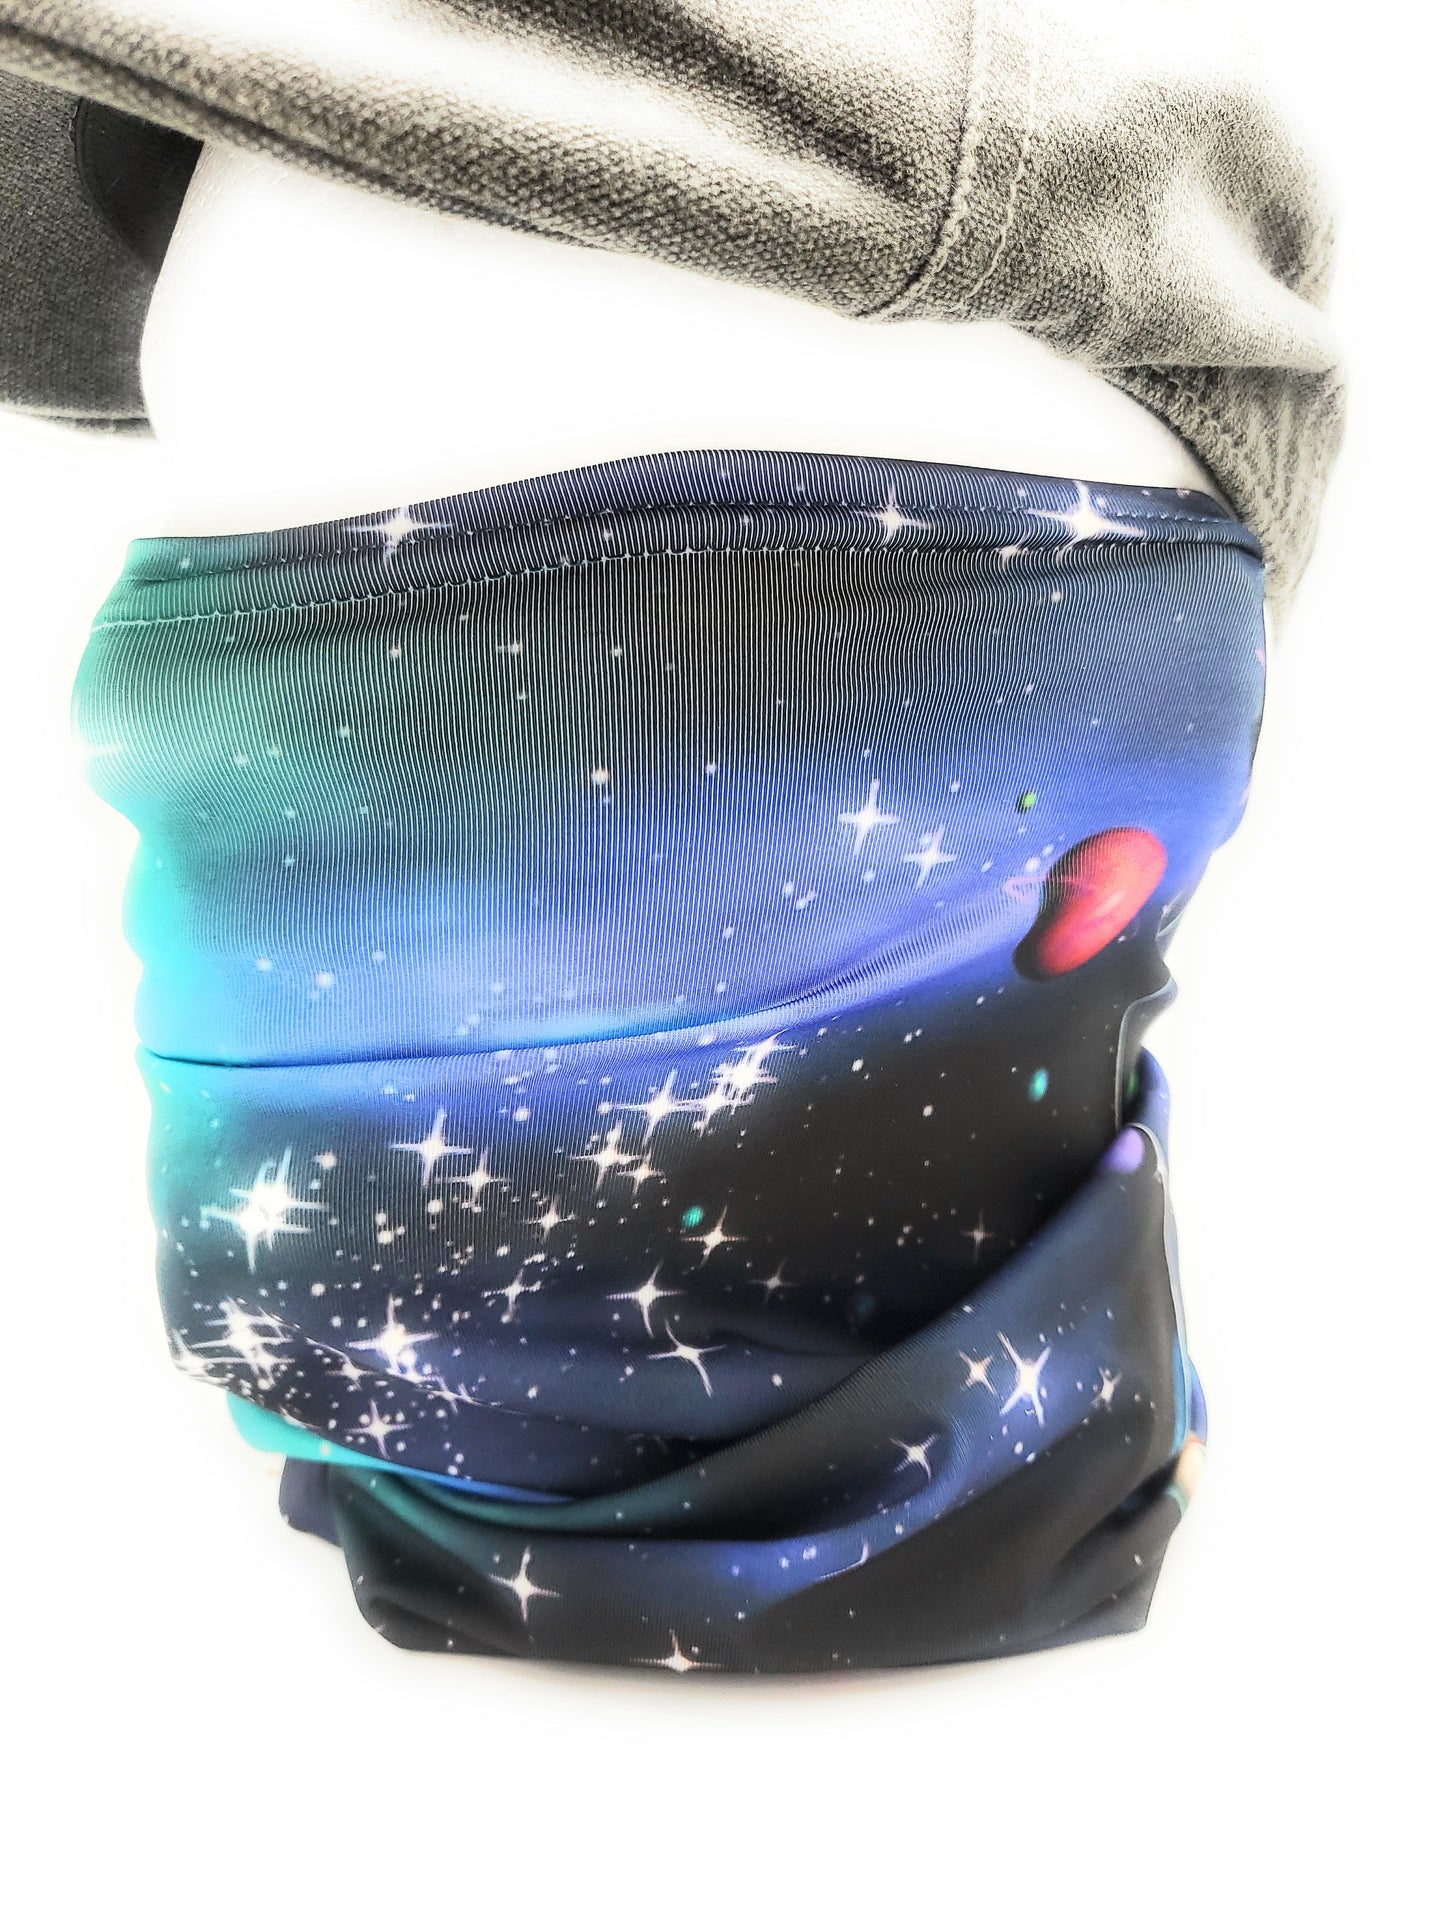 Neck Gaiter, Space Bowling Theme, Comfortable Face Cover, Breathable, Can be Personalization Optional - Full or Half Size Available